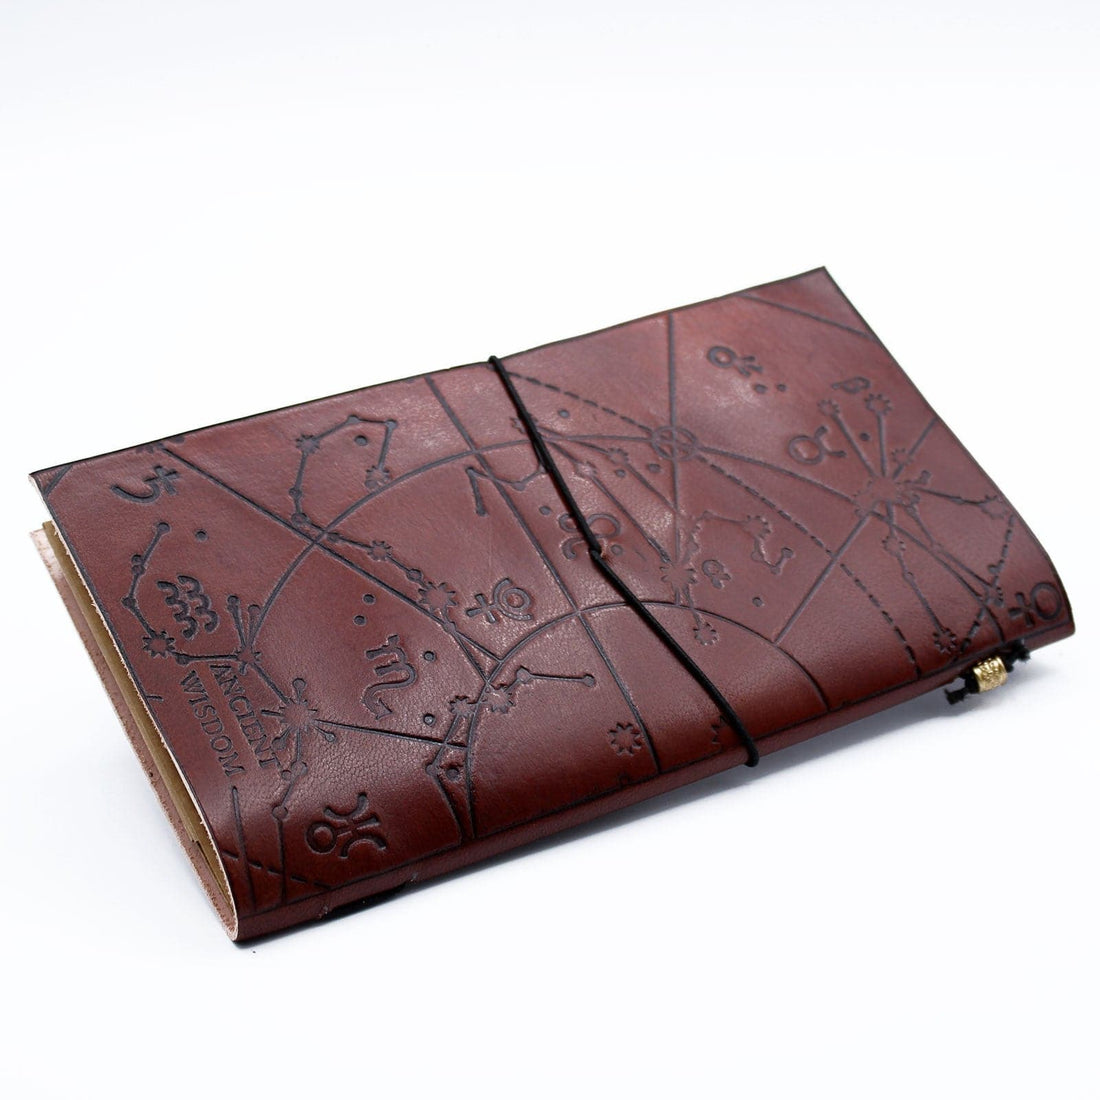 Handmade Leather Journal - My Bucket List Book - Brown (80 pages) - best price from Maltashopper.com MSJ-07